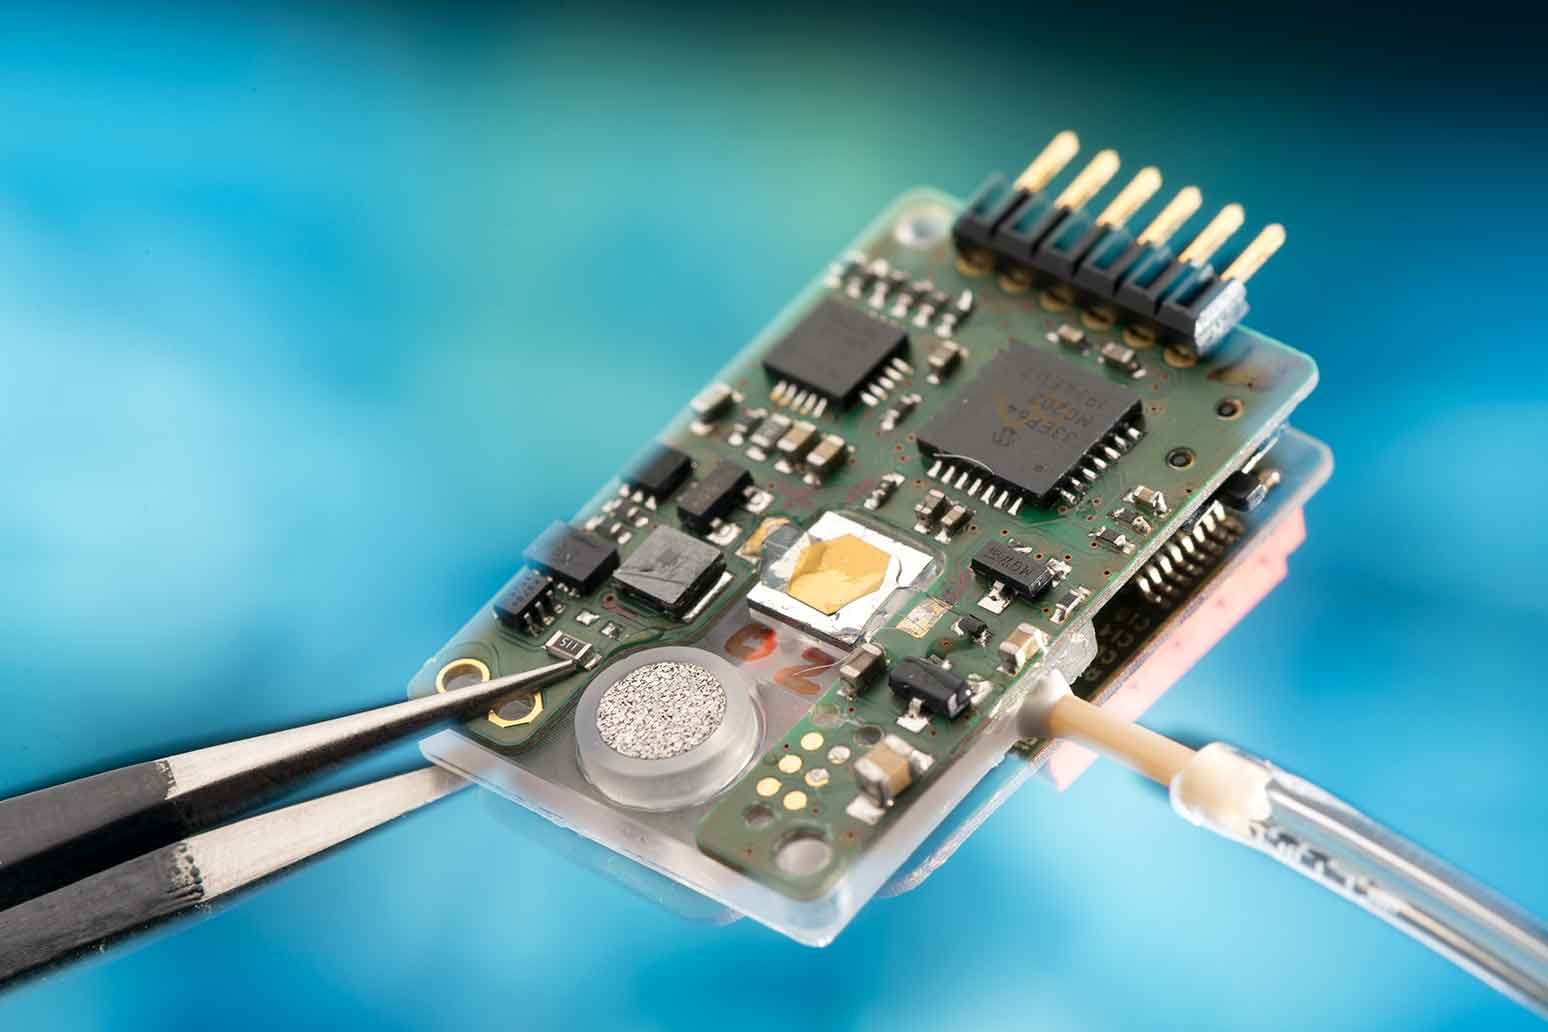 Energy efficient particulate matter sensor for Internet-of-Things applications.